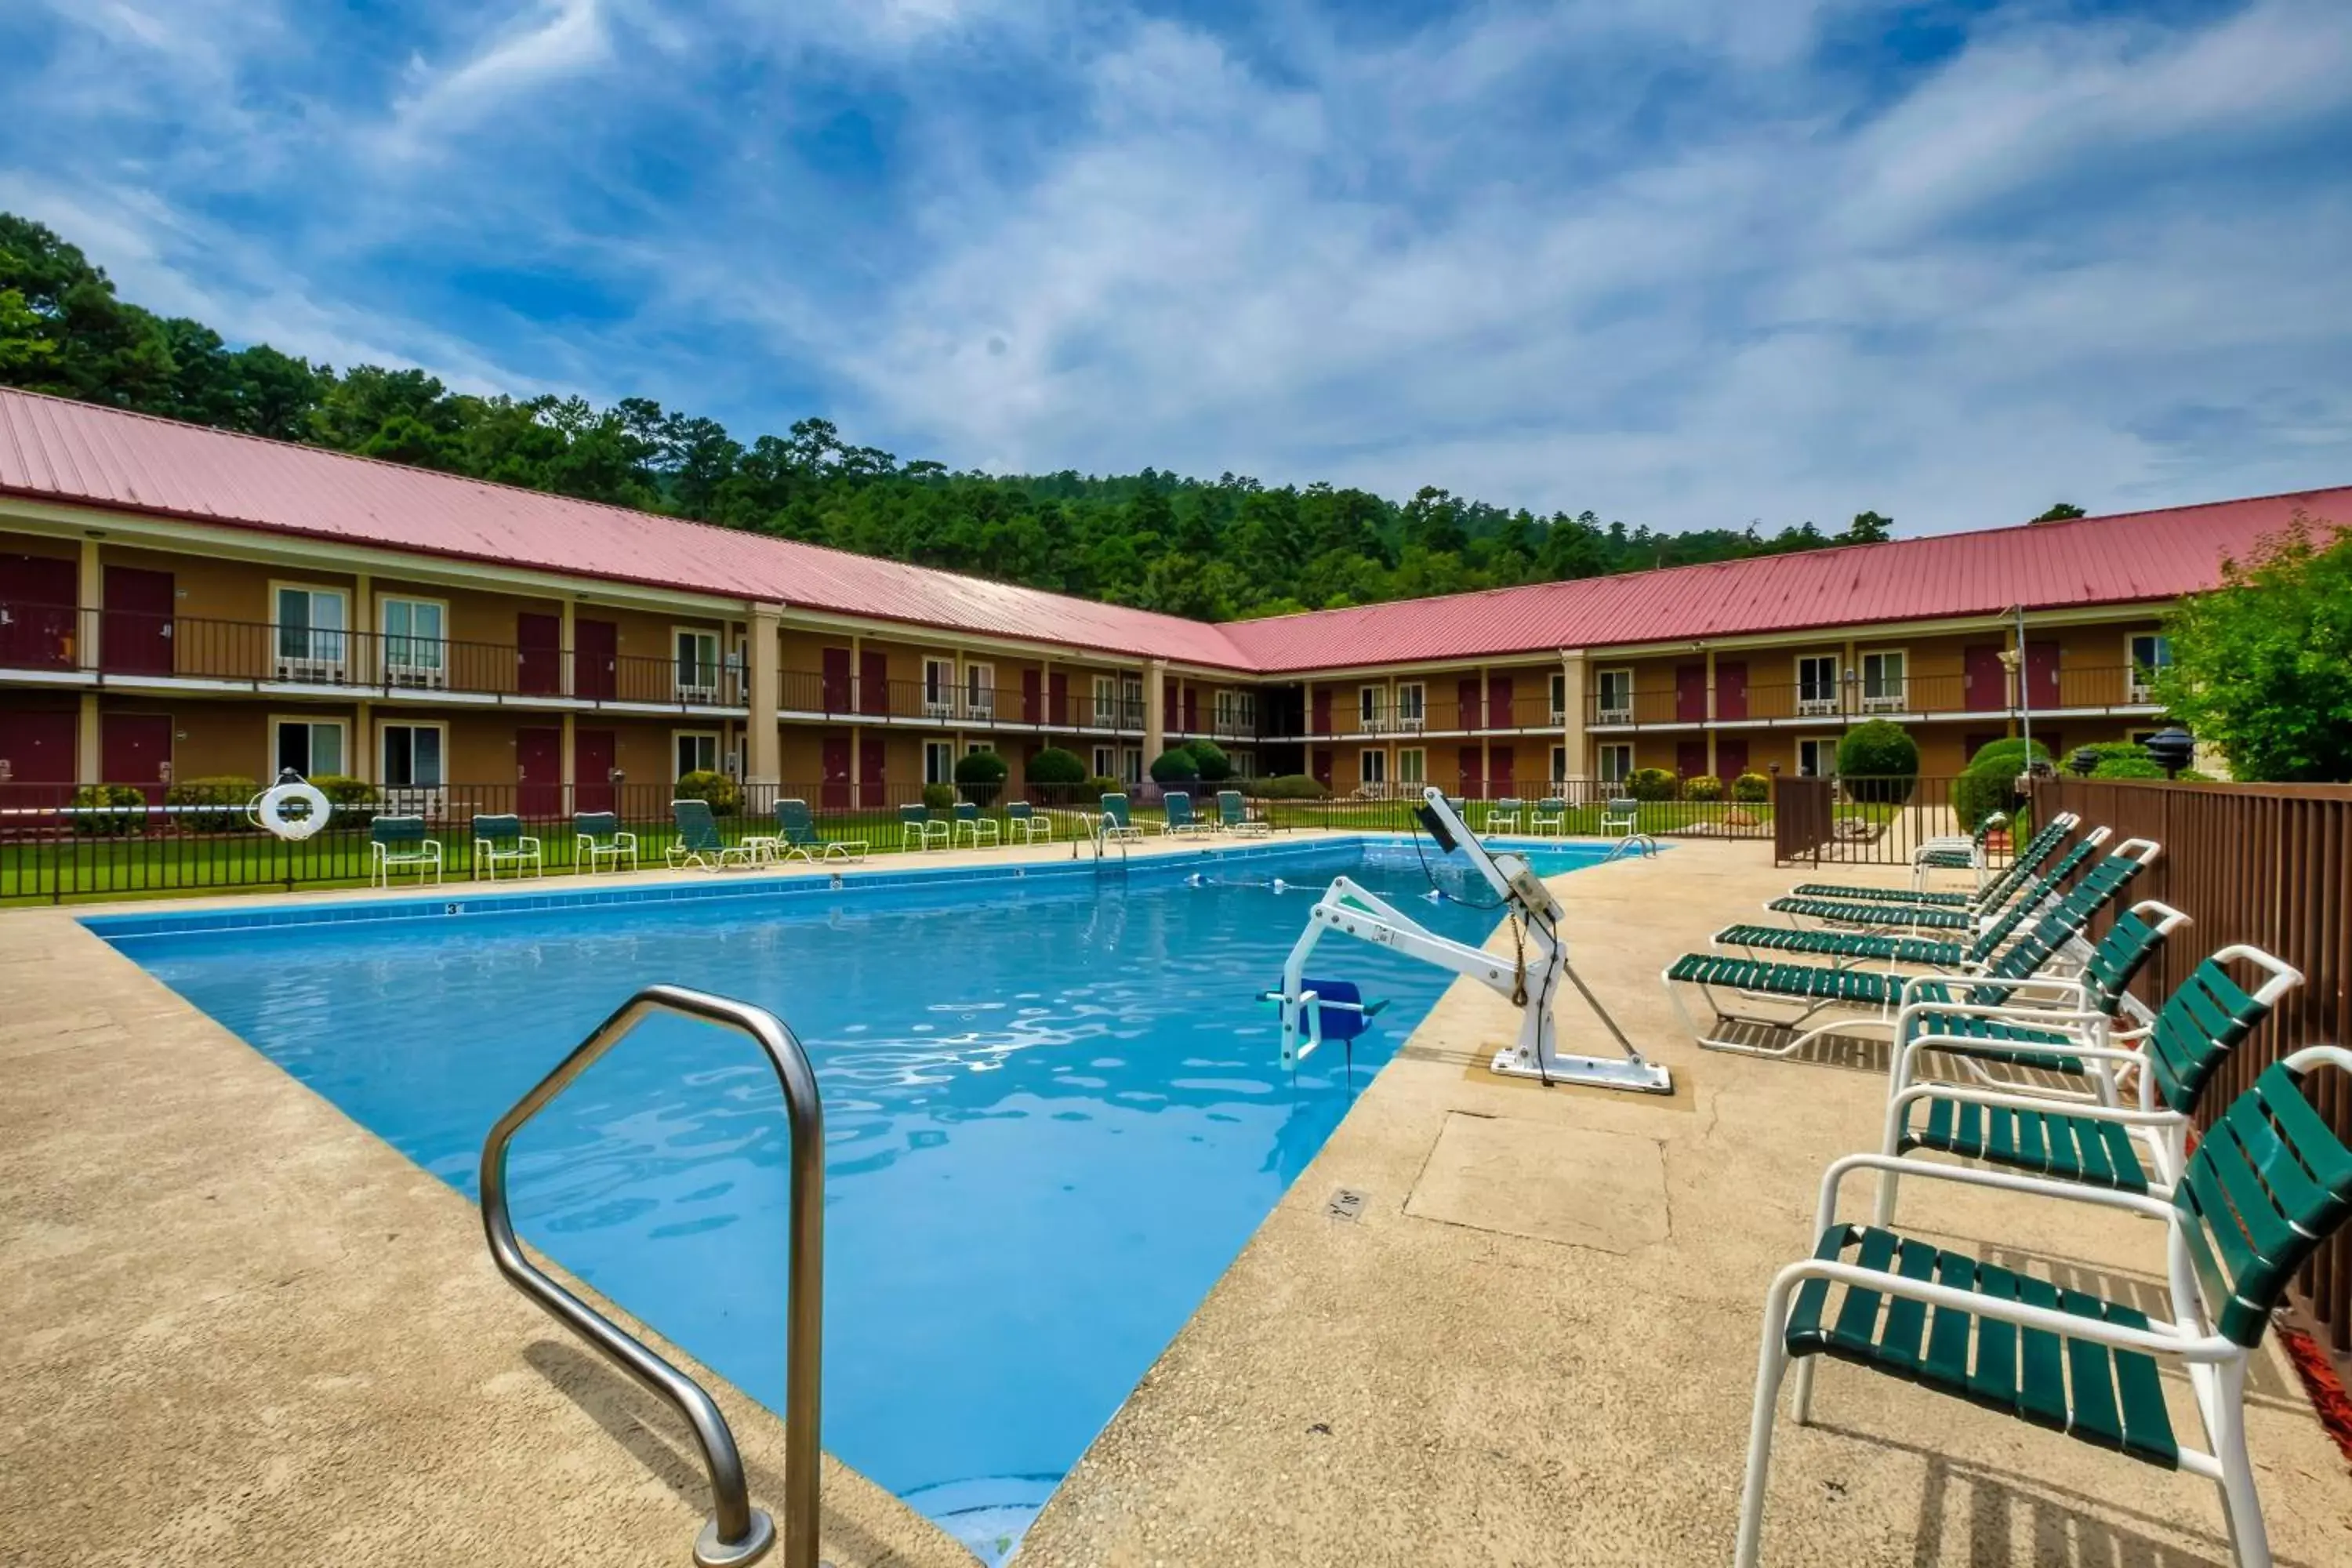 Swimming pool, Property Building in Red Roof Inn Hot Springs